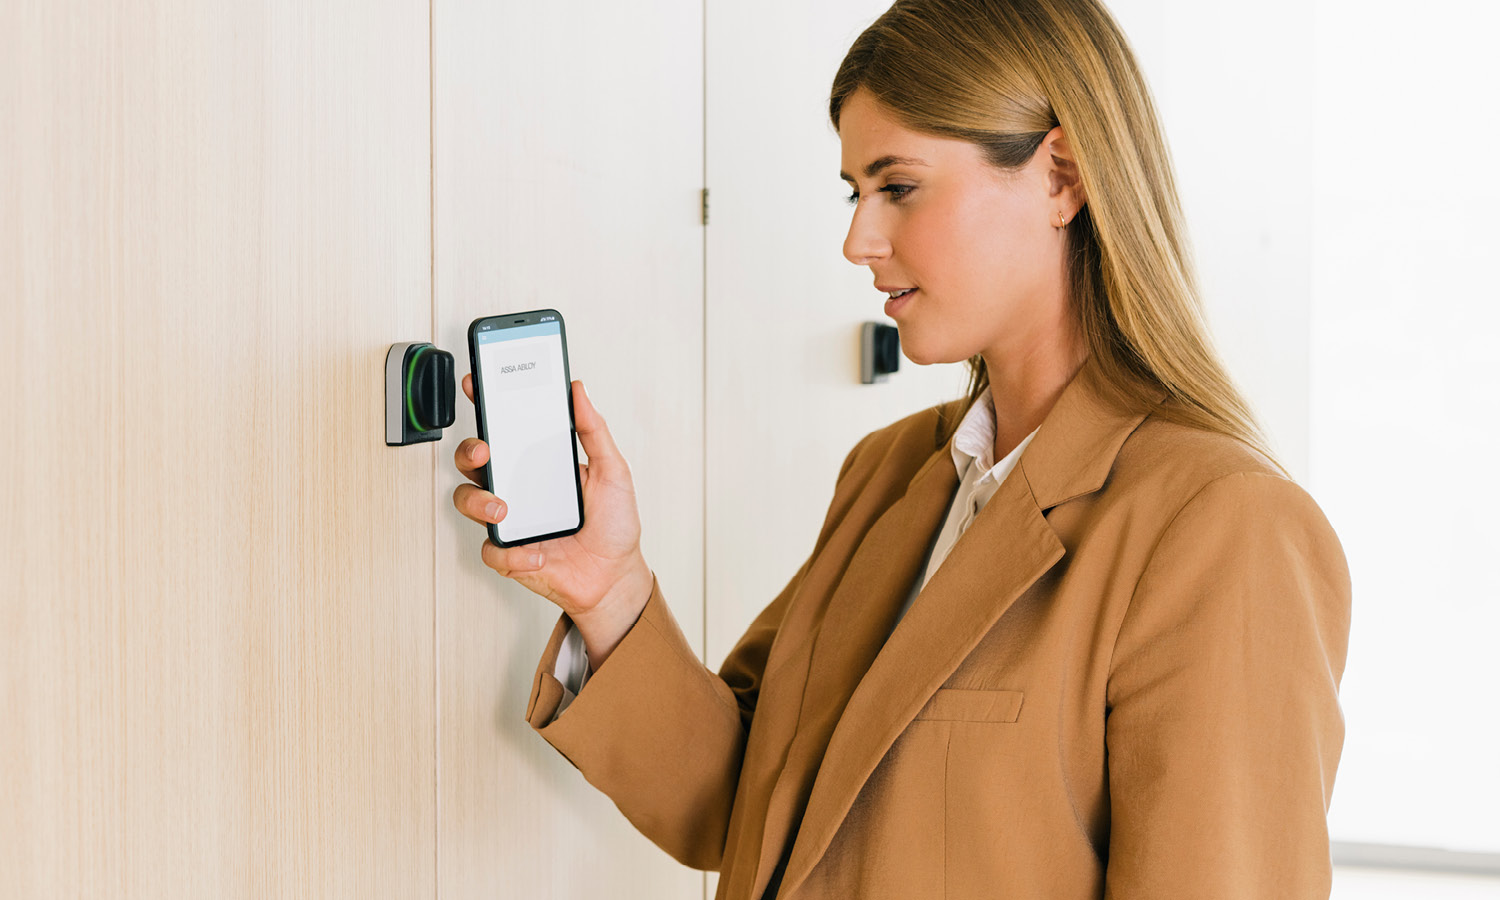 ASSA ABLOY launches Aperio® KL100: a new wireless access solution for lockers and cabinets brings improved security to valuables